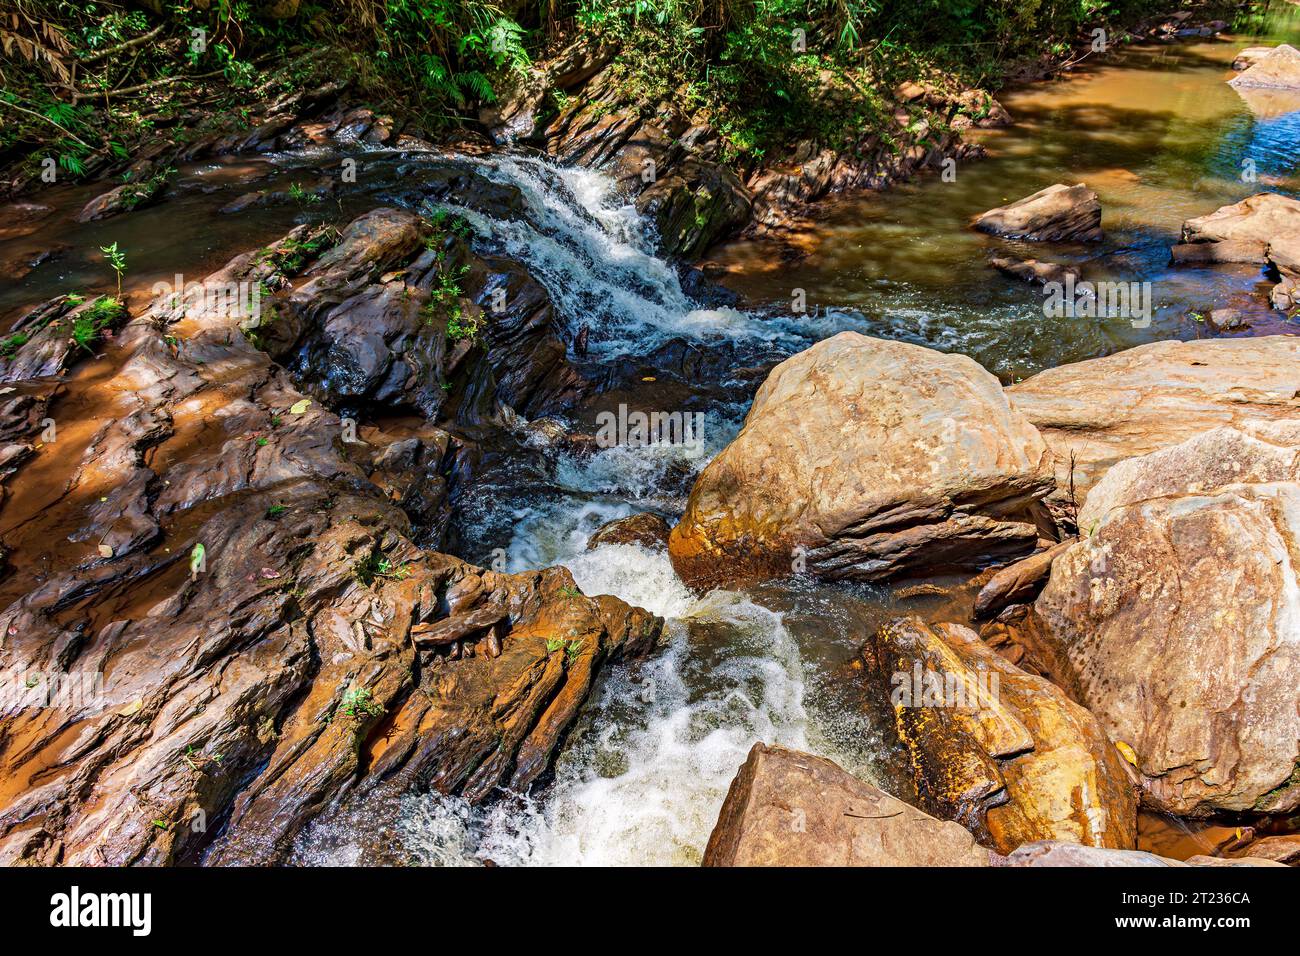 Stream of calm waters between rocks and surrounded by vegetation Stock Photo